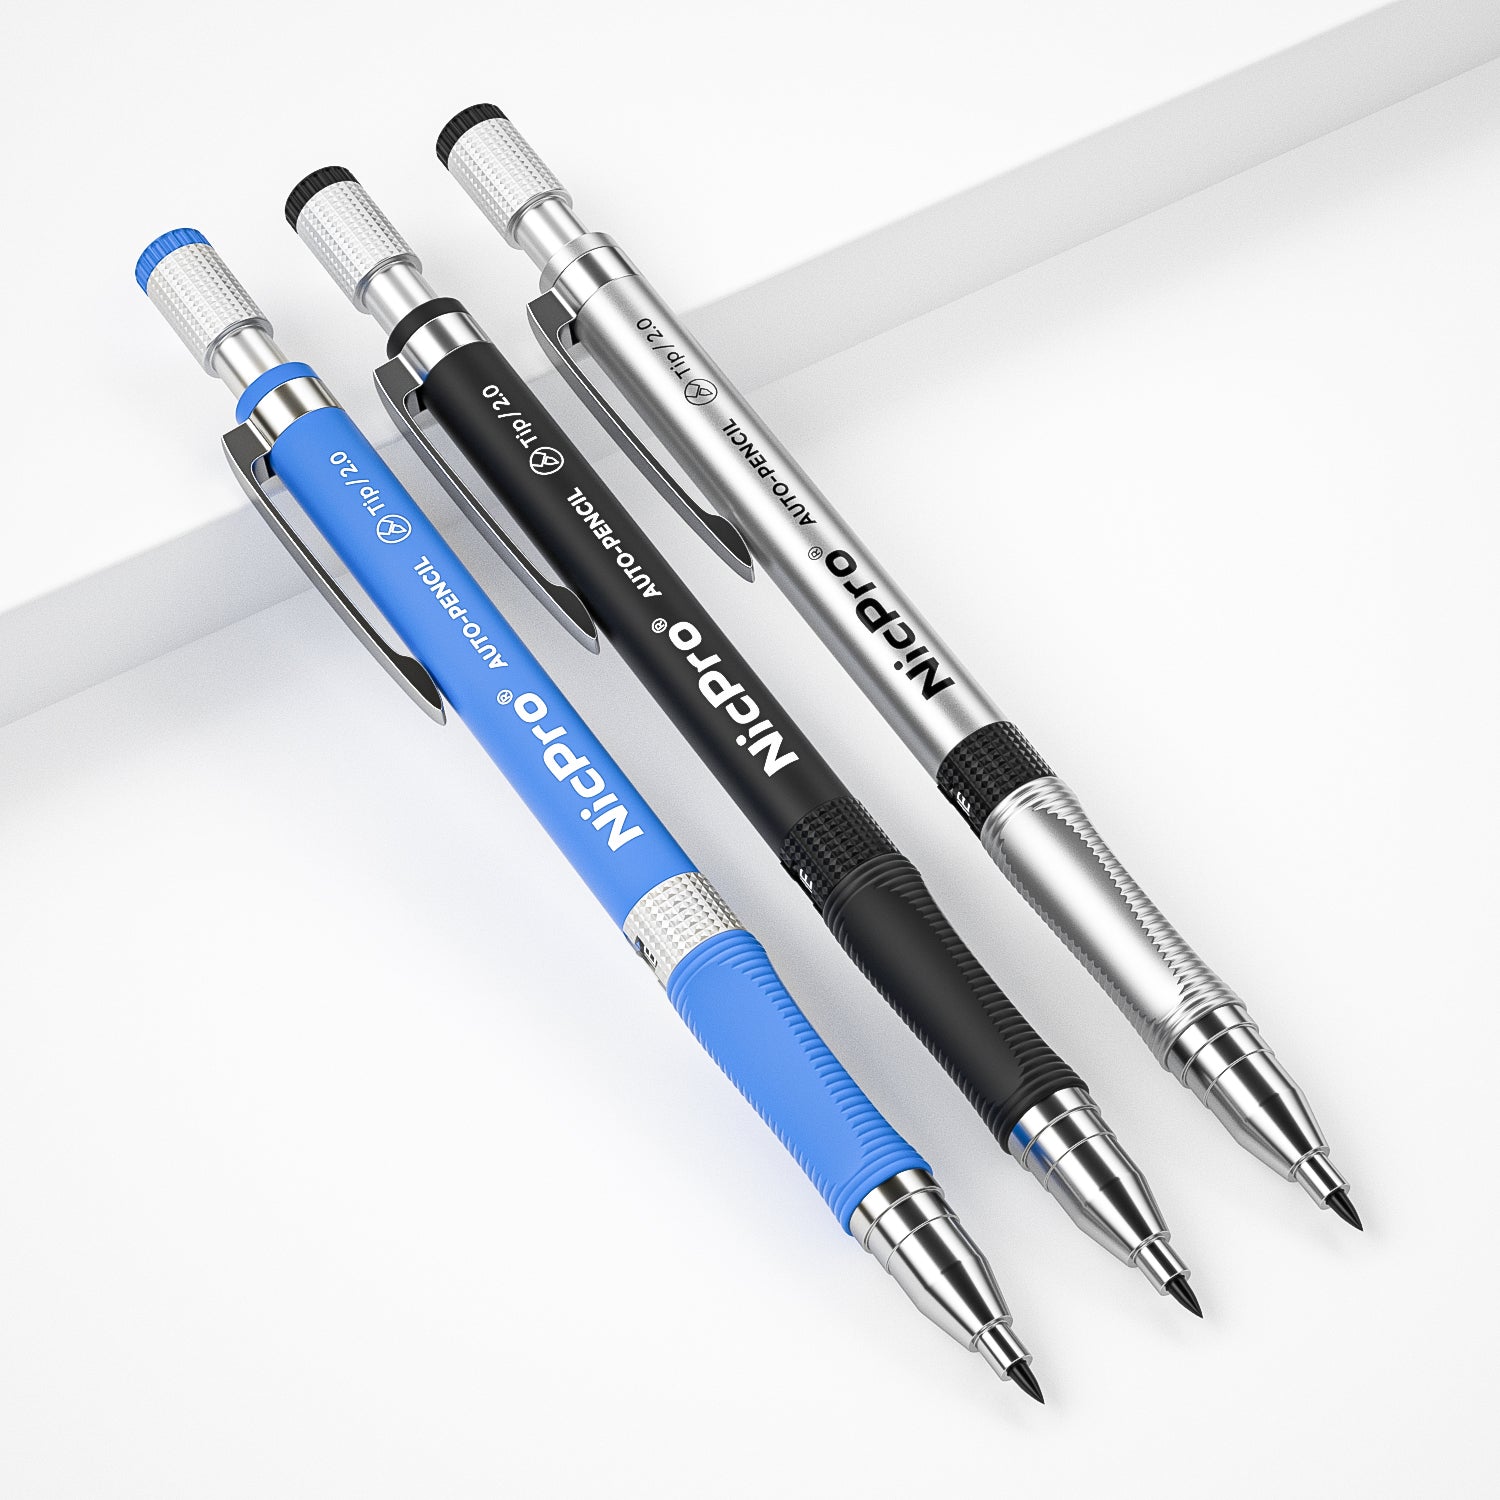 Nicpro 2.0 mm Mechanical Pencil Set, 9 Artist Carpenters Drafting Clutch Pencil for Drawing Writing Crafting Art Sketching with Colors HB & 2B Refill, Eraser, Sharpener, Propelling Lead Holder